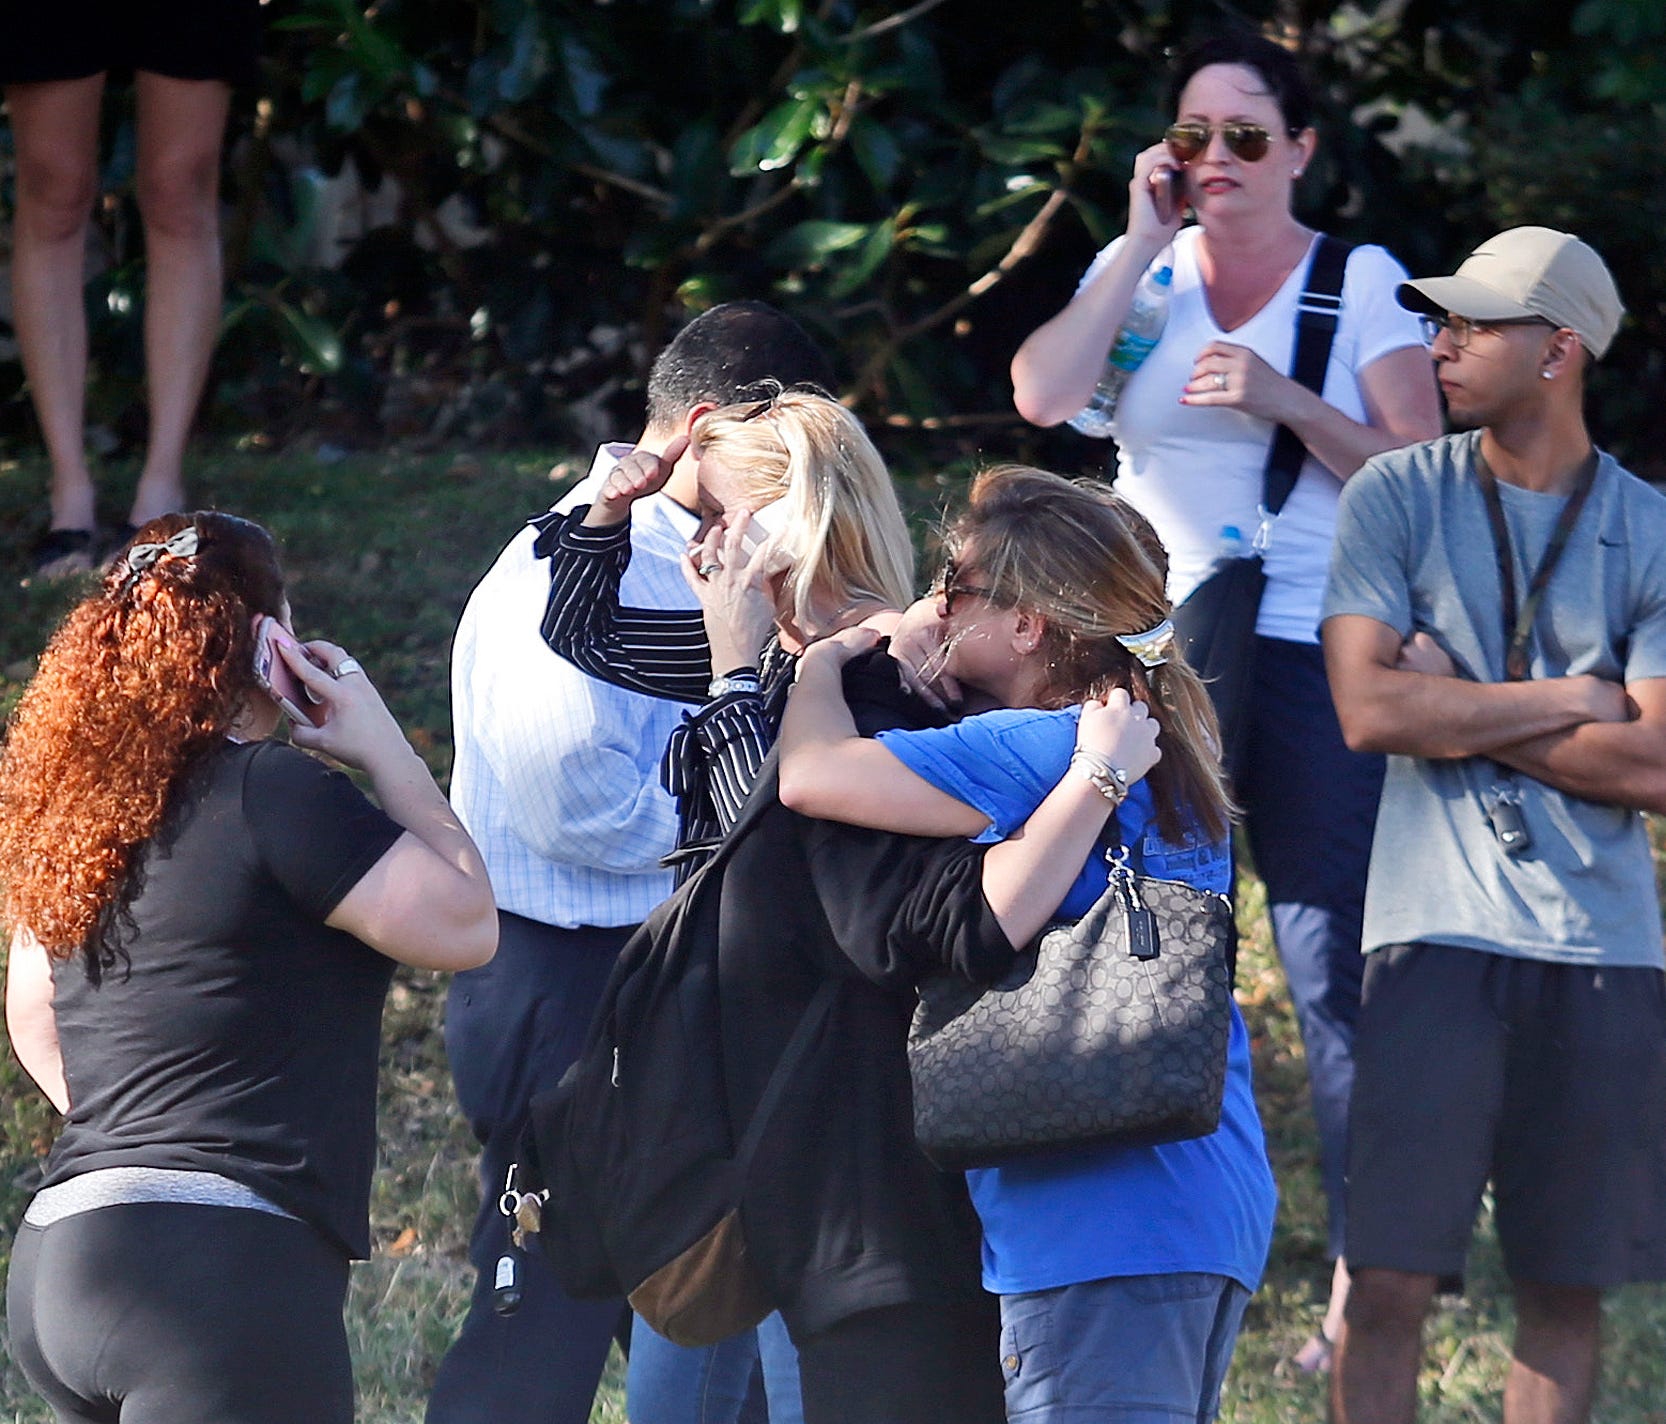 Family members wait for news of students after a school shooting.